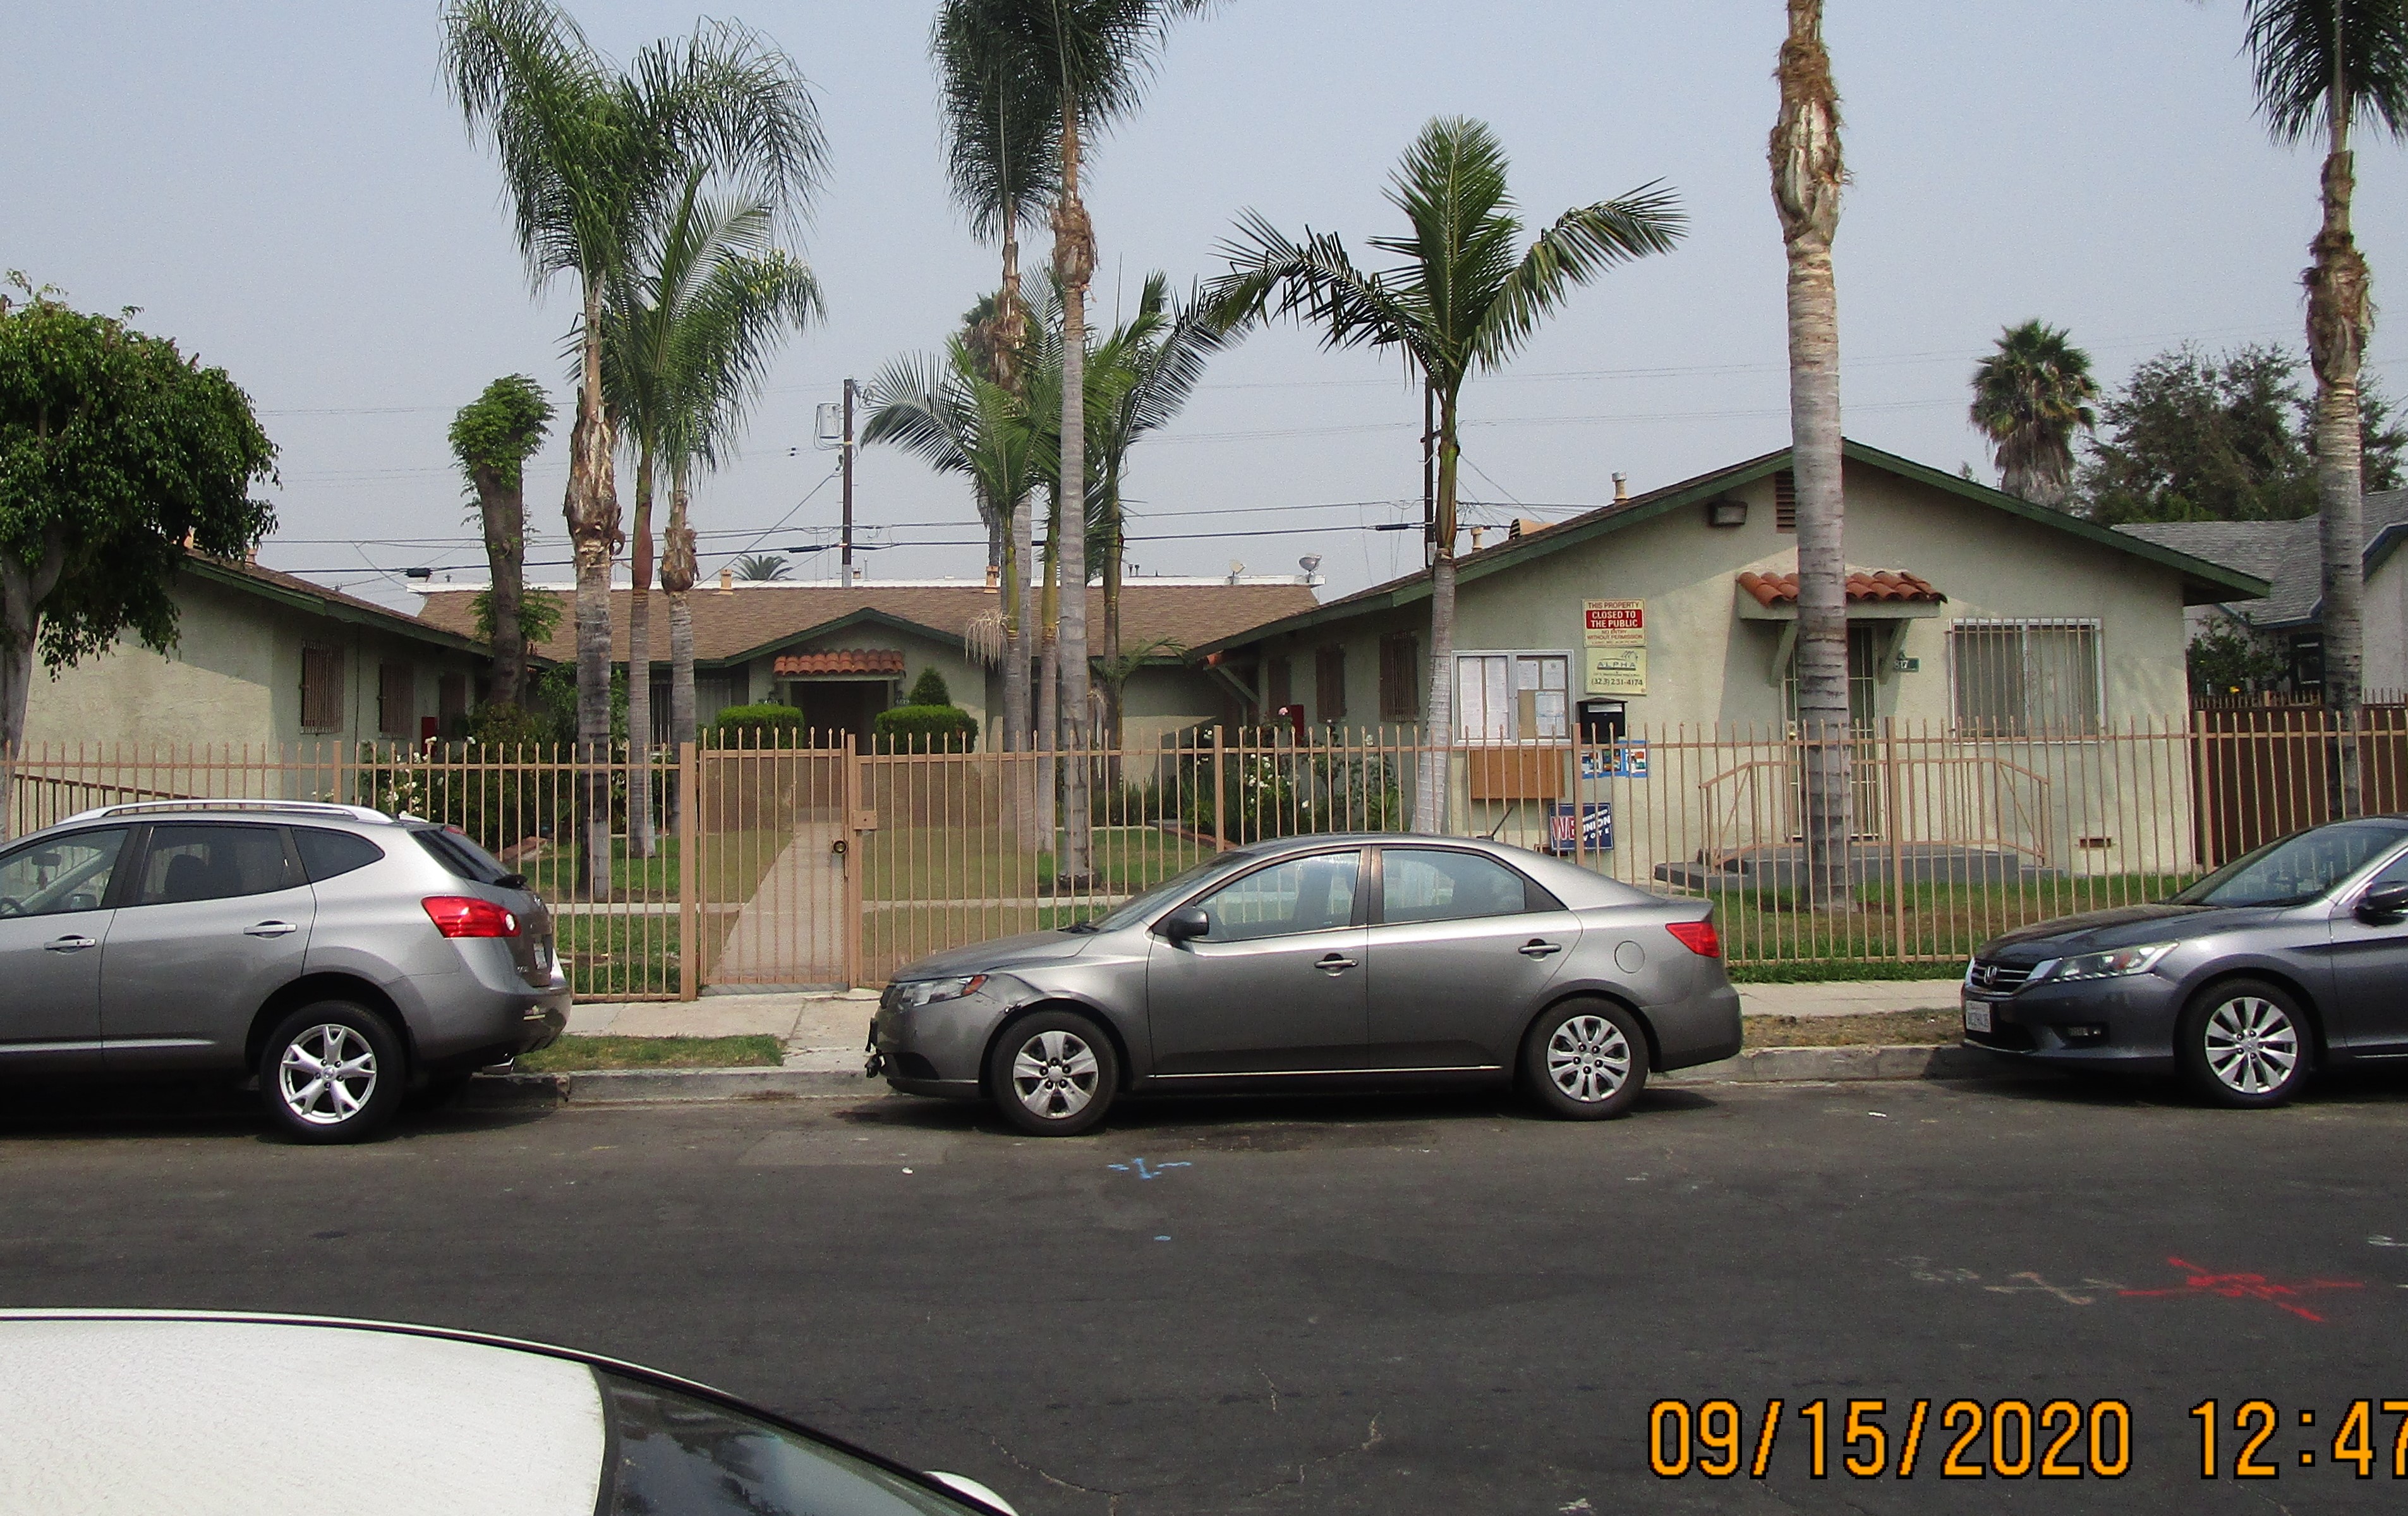 Front view of a light green courtyard style building, brick roof on top of each unit entrance, gated, locked showcase and closed to the public and management signs are posted on the right side of the building, palm trees, bushes and flowers, parked cars i